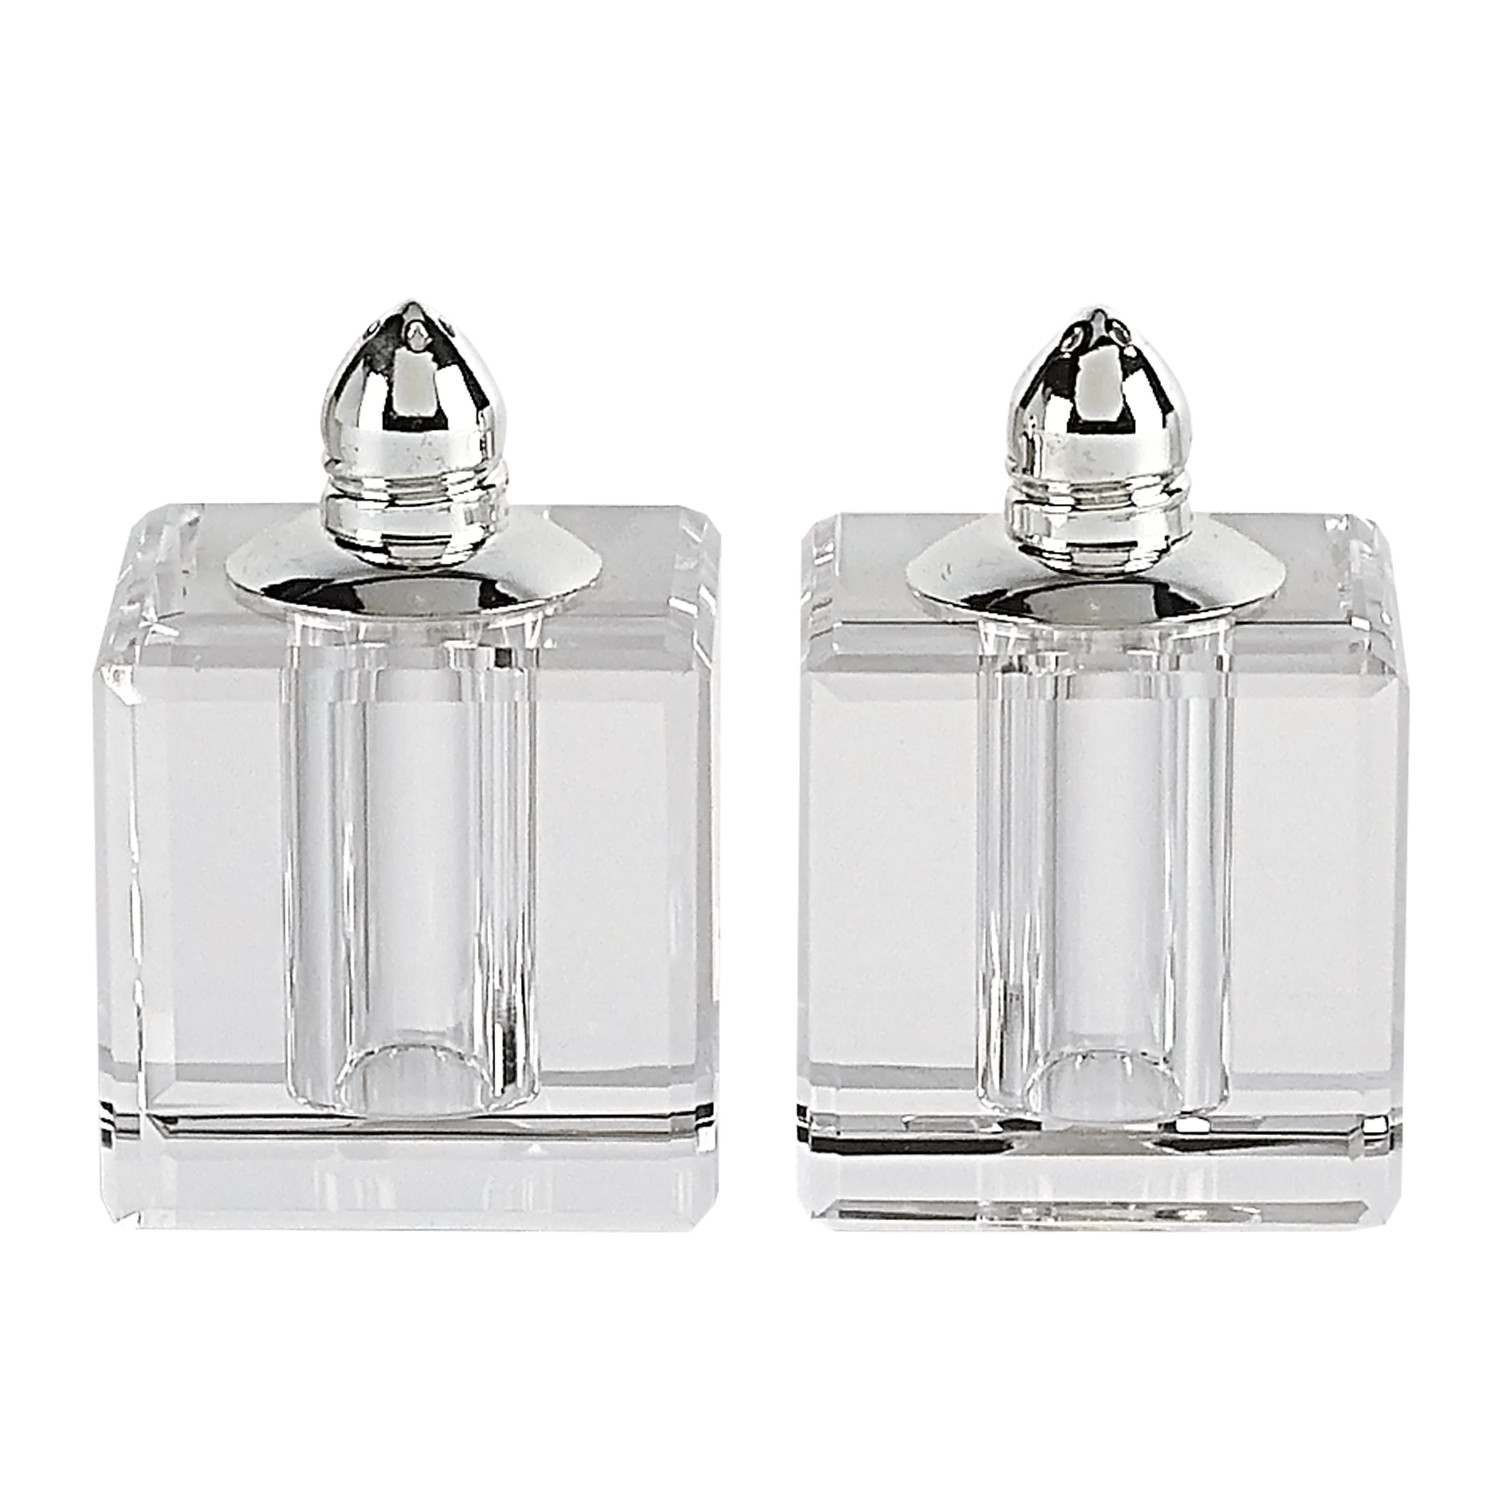 Handcrafted Optical Crystal and Silver Square Size Salt & Pepper Shakers